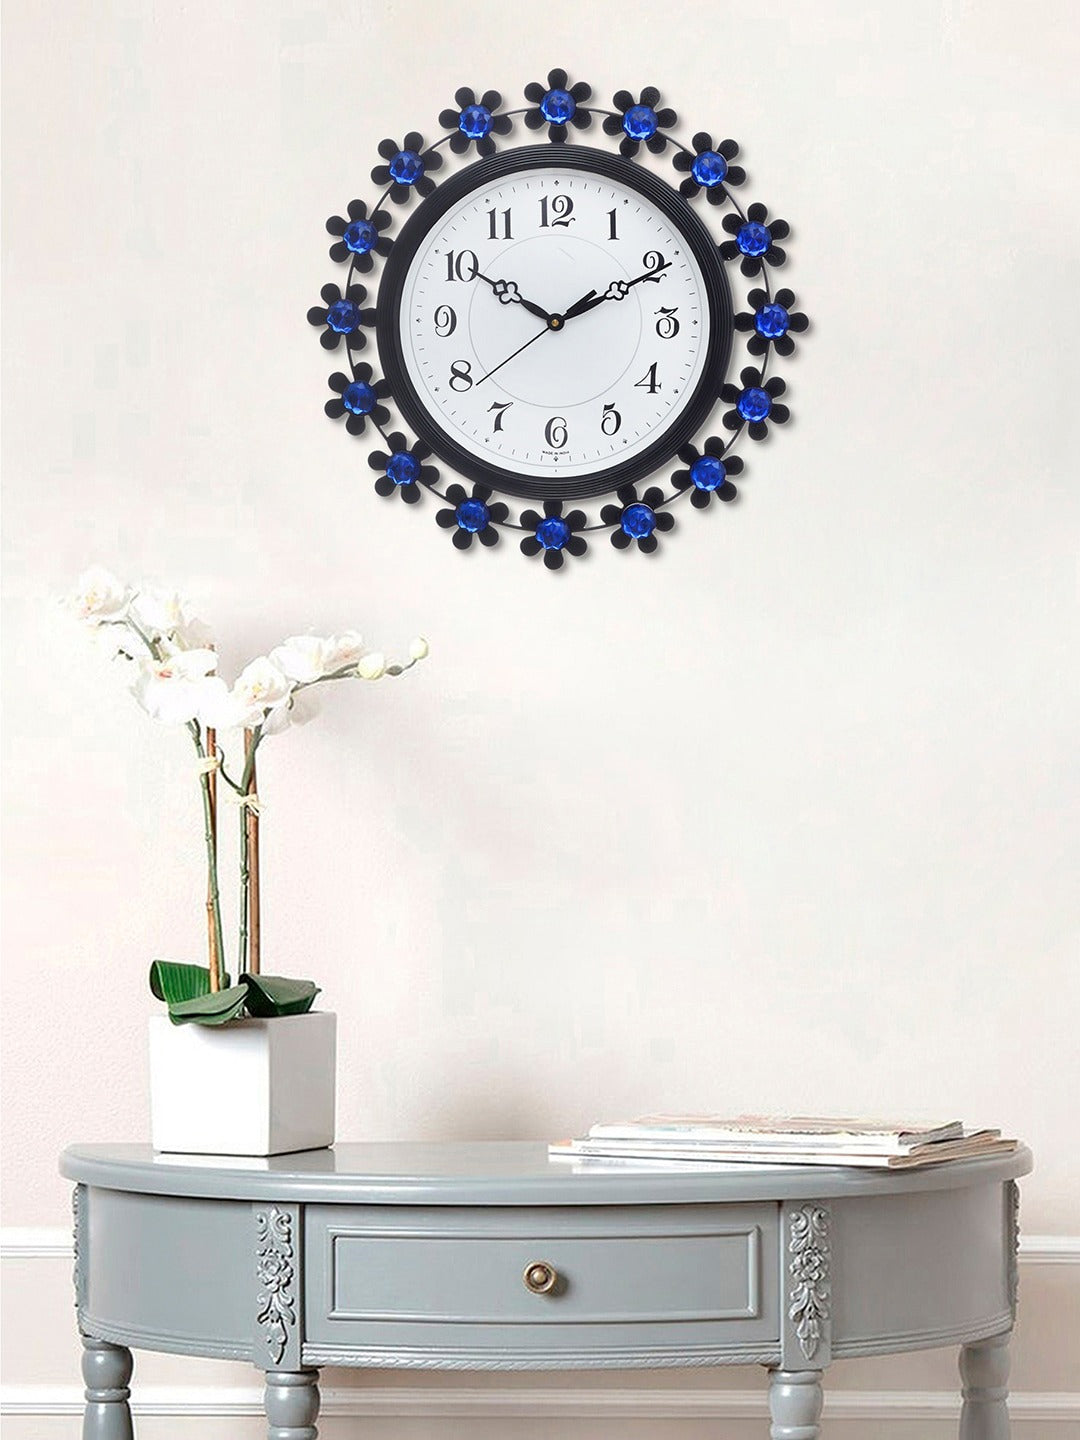 Blue & White Embellished Round Analogue Contemporary Wall Clock